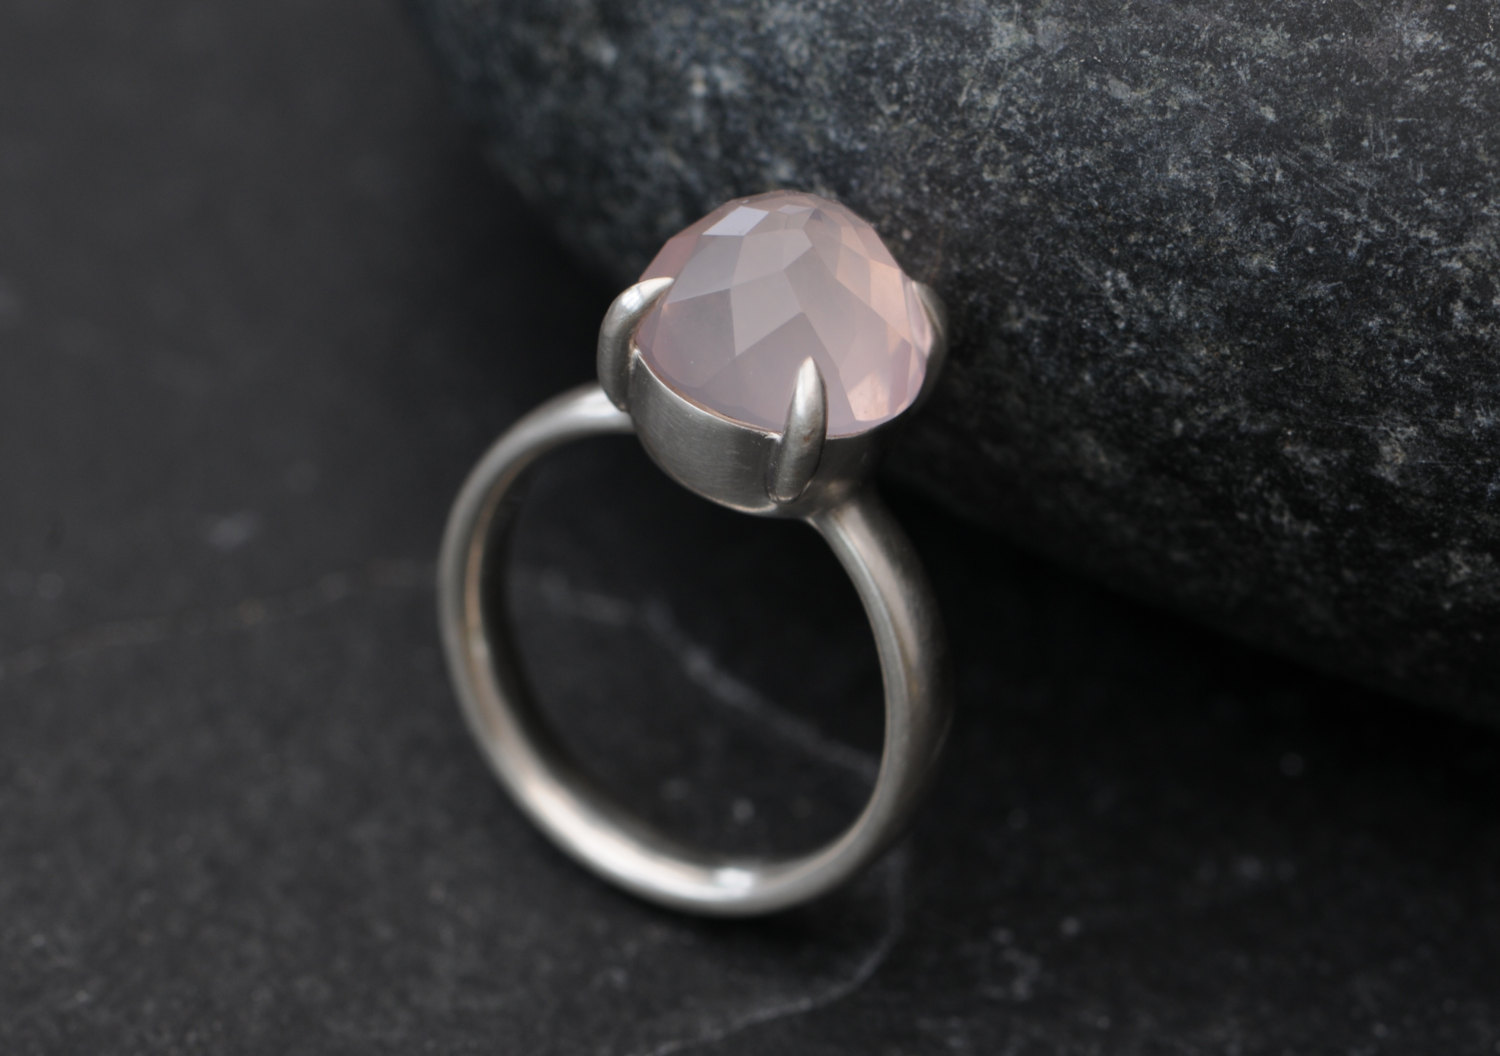 Pale pink rose cut rose quartz stone claw set in sterling silver ring